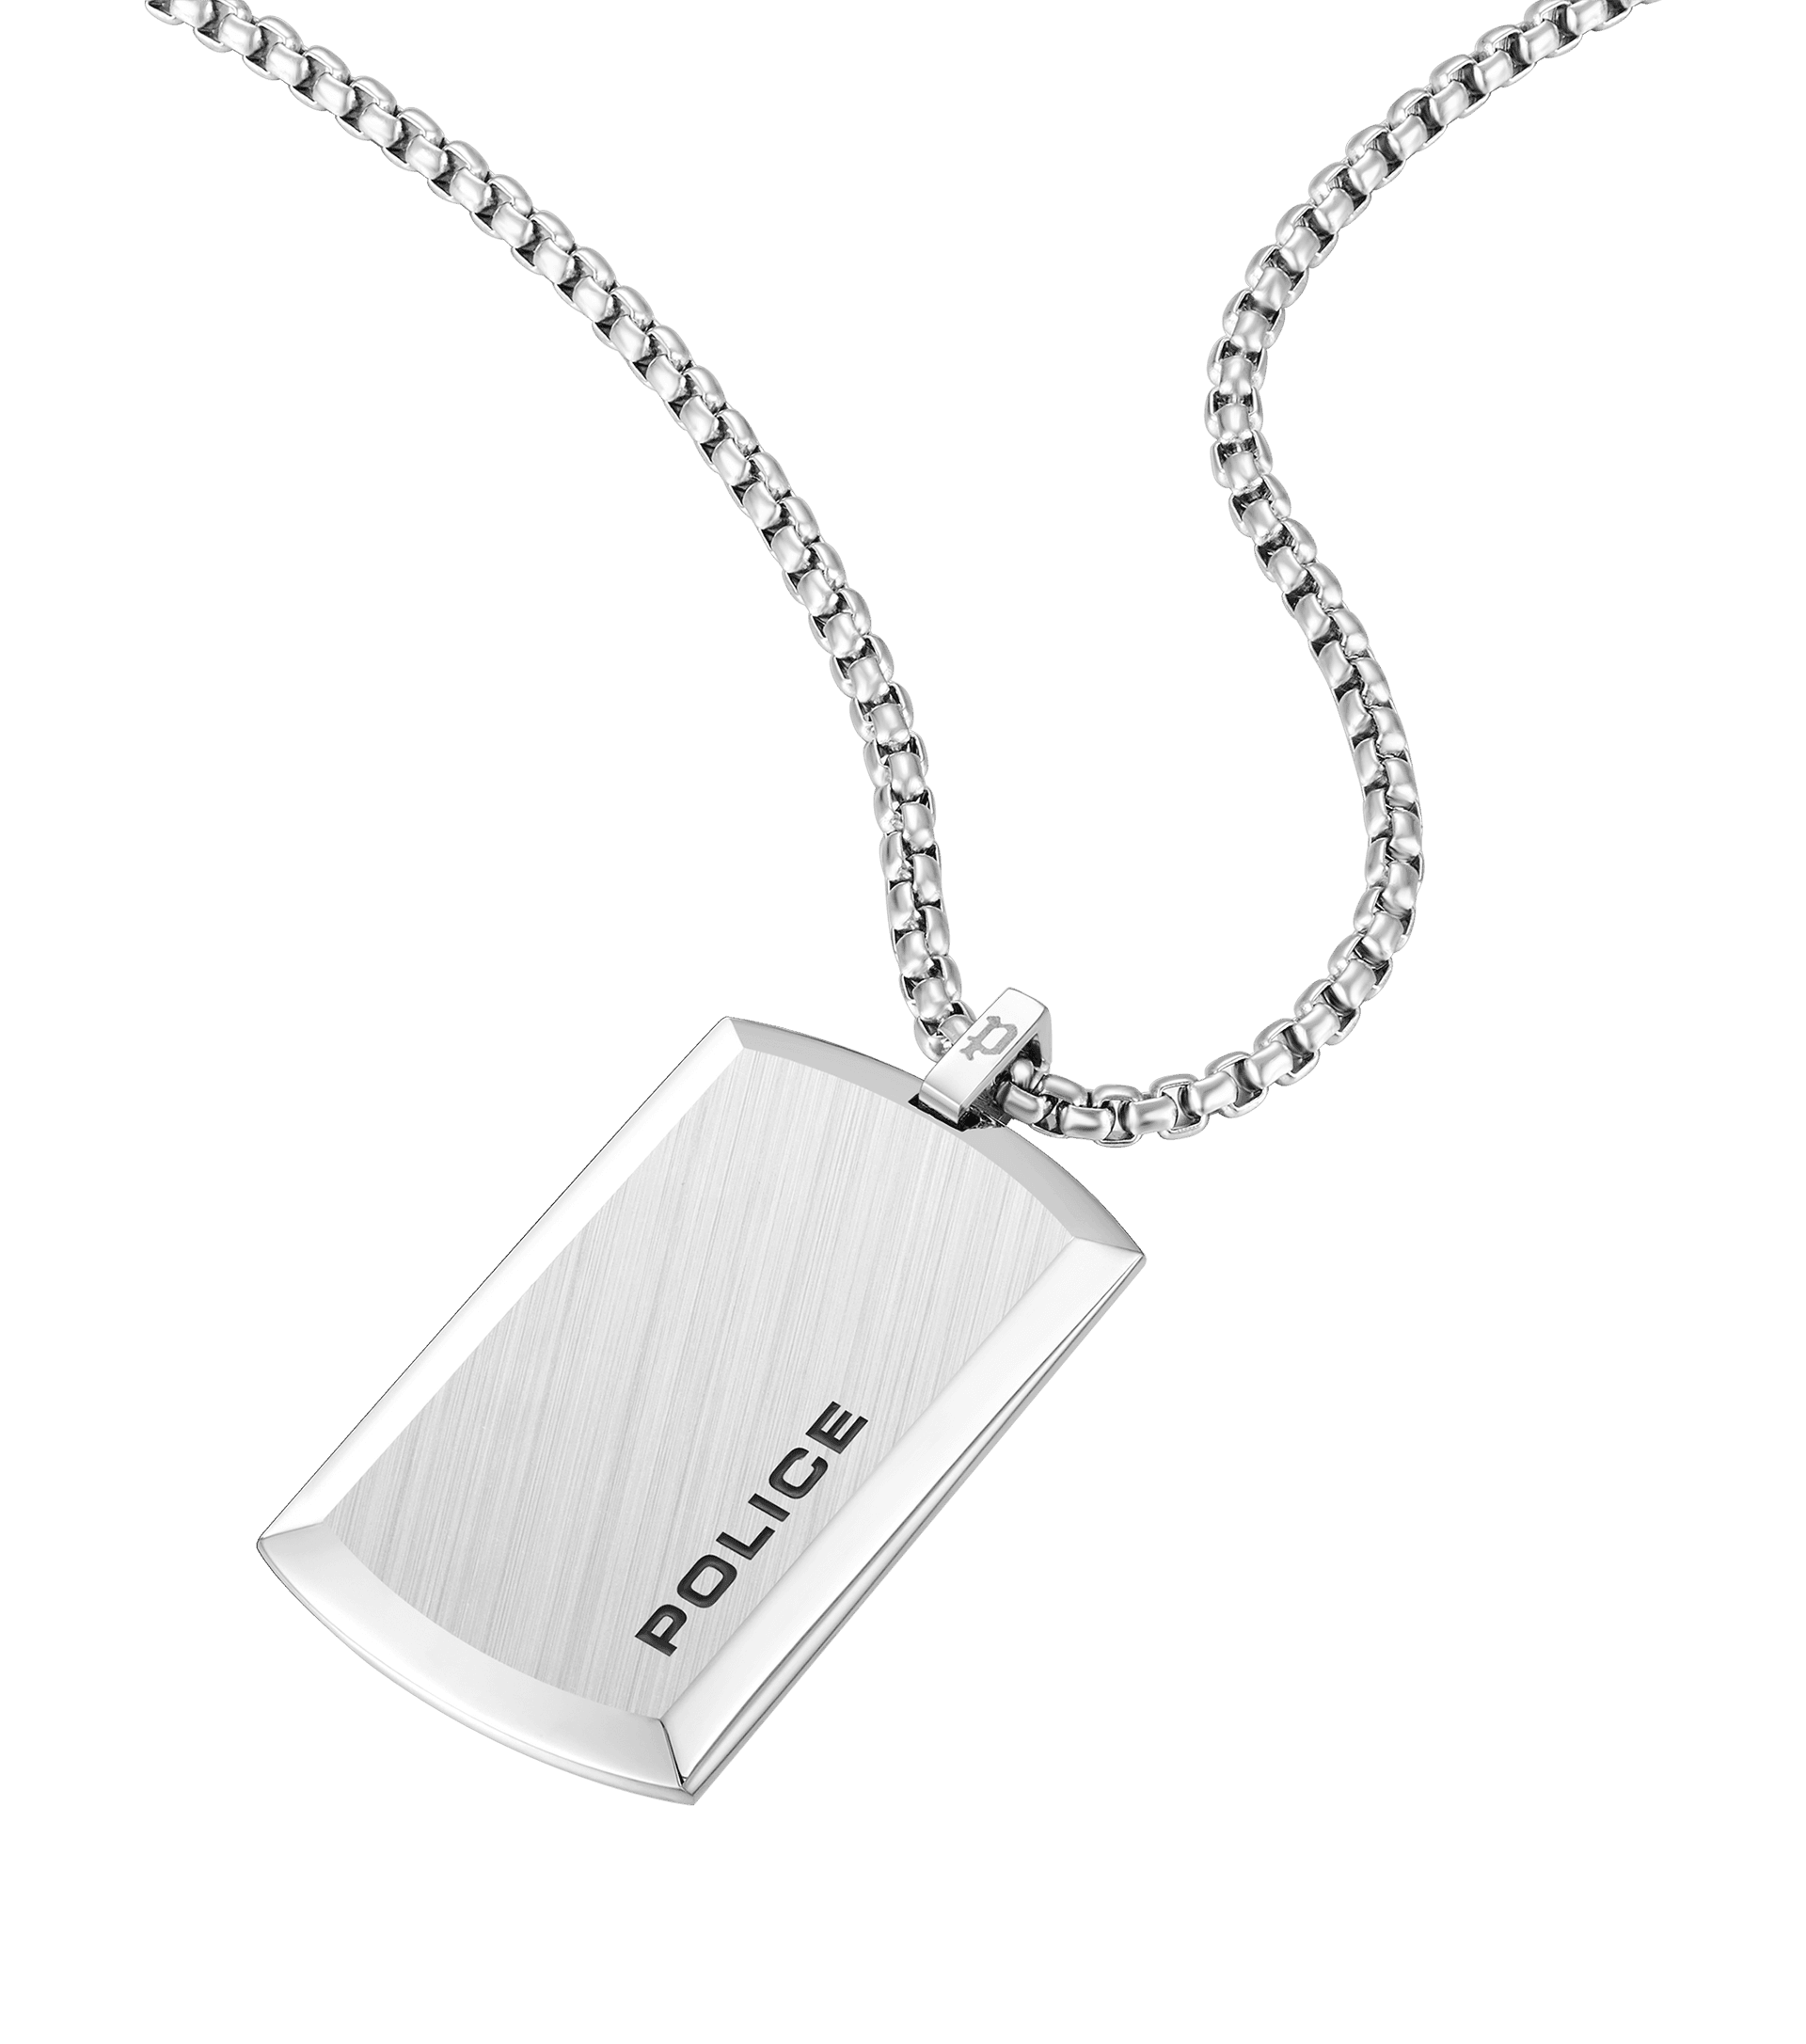 Police jewels - Purity II Necklace By Police For Men PEAGN0009801